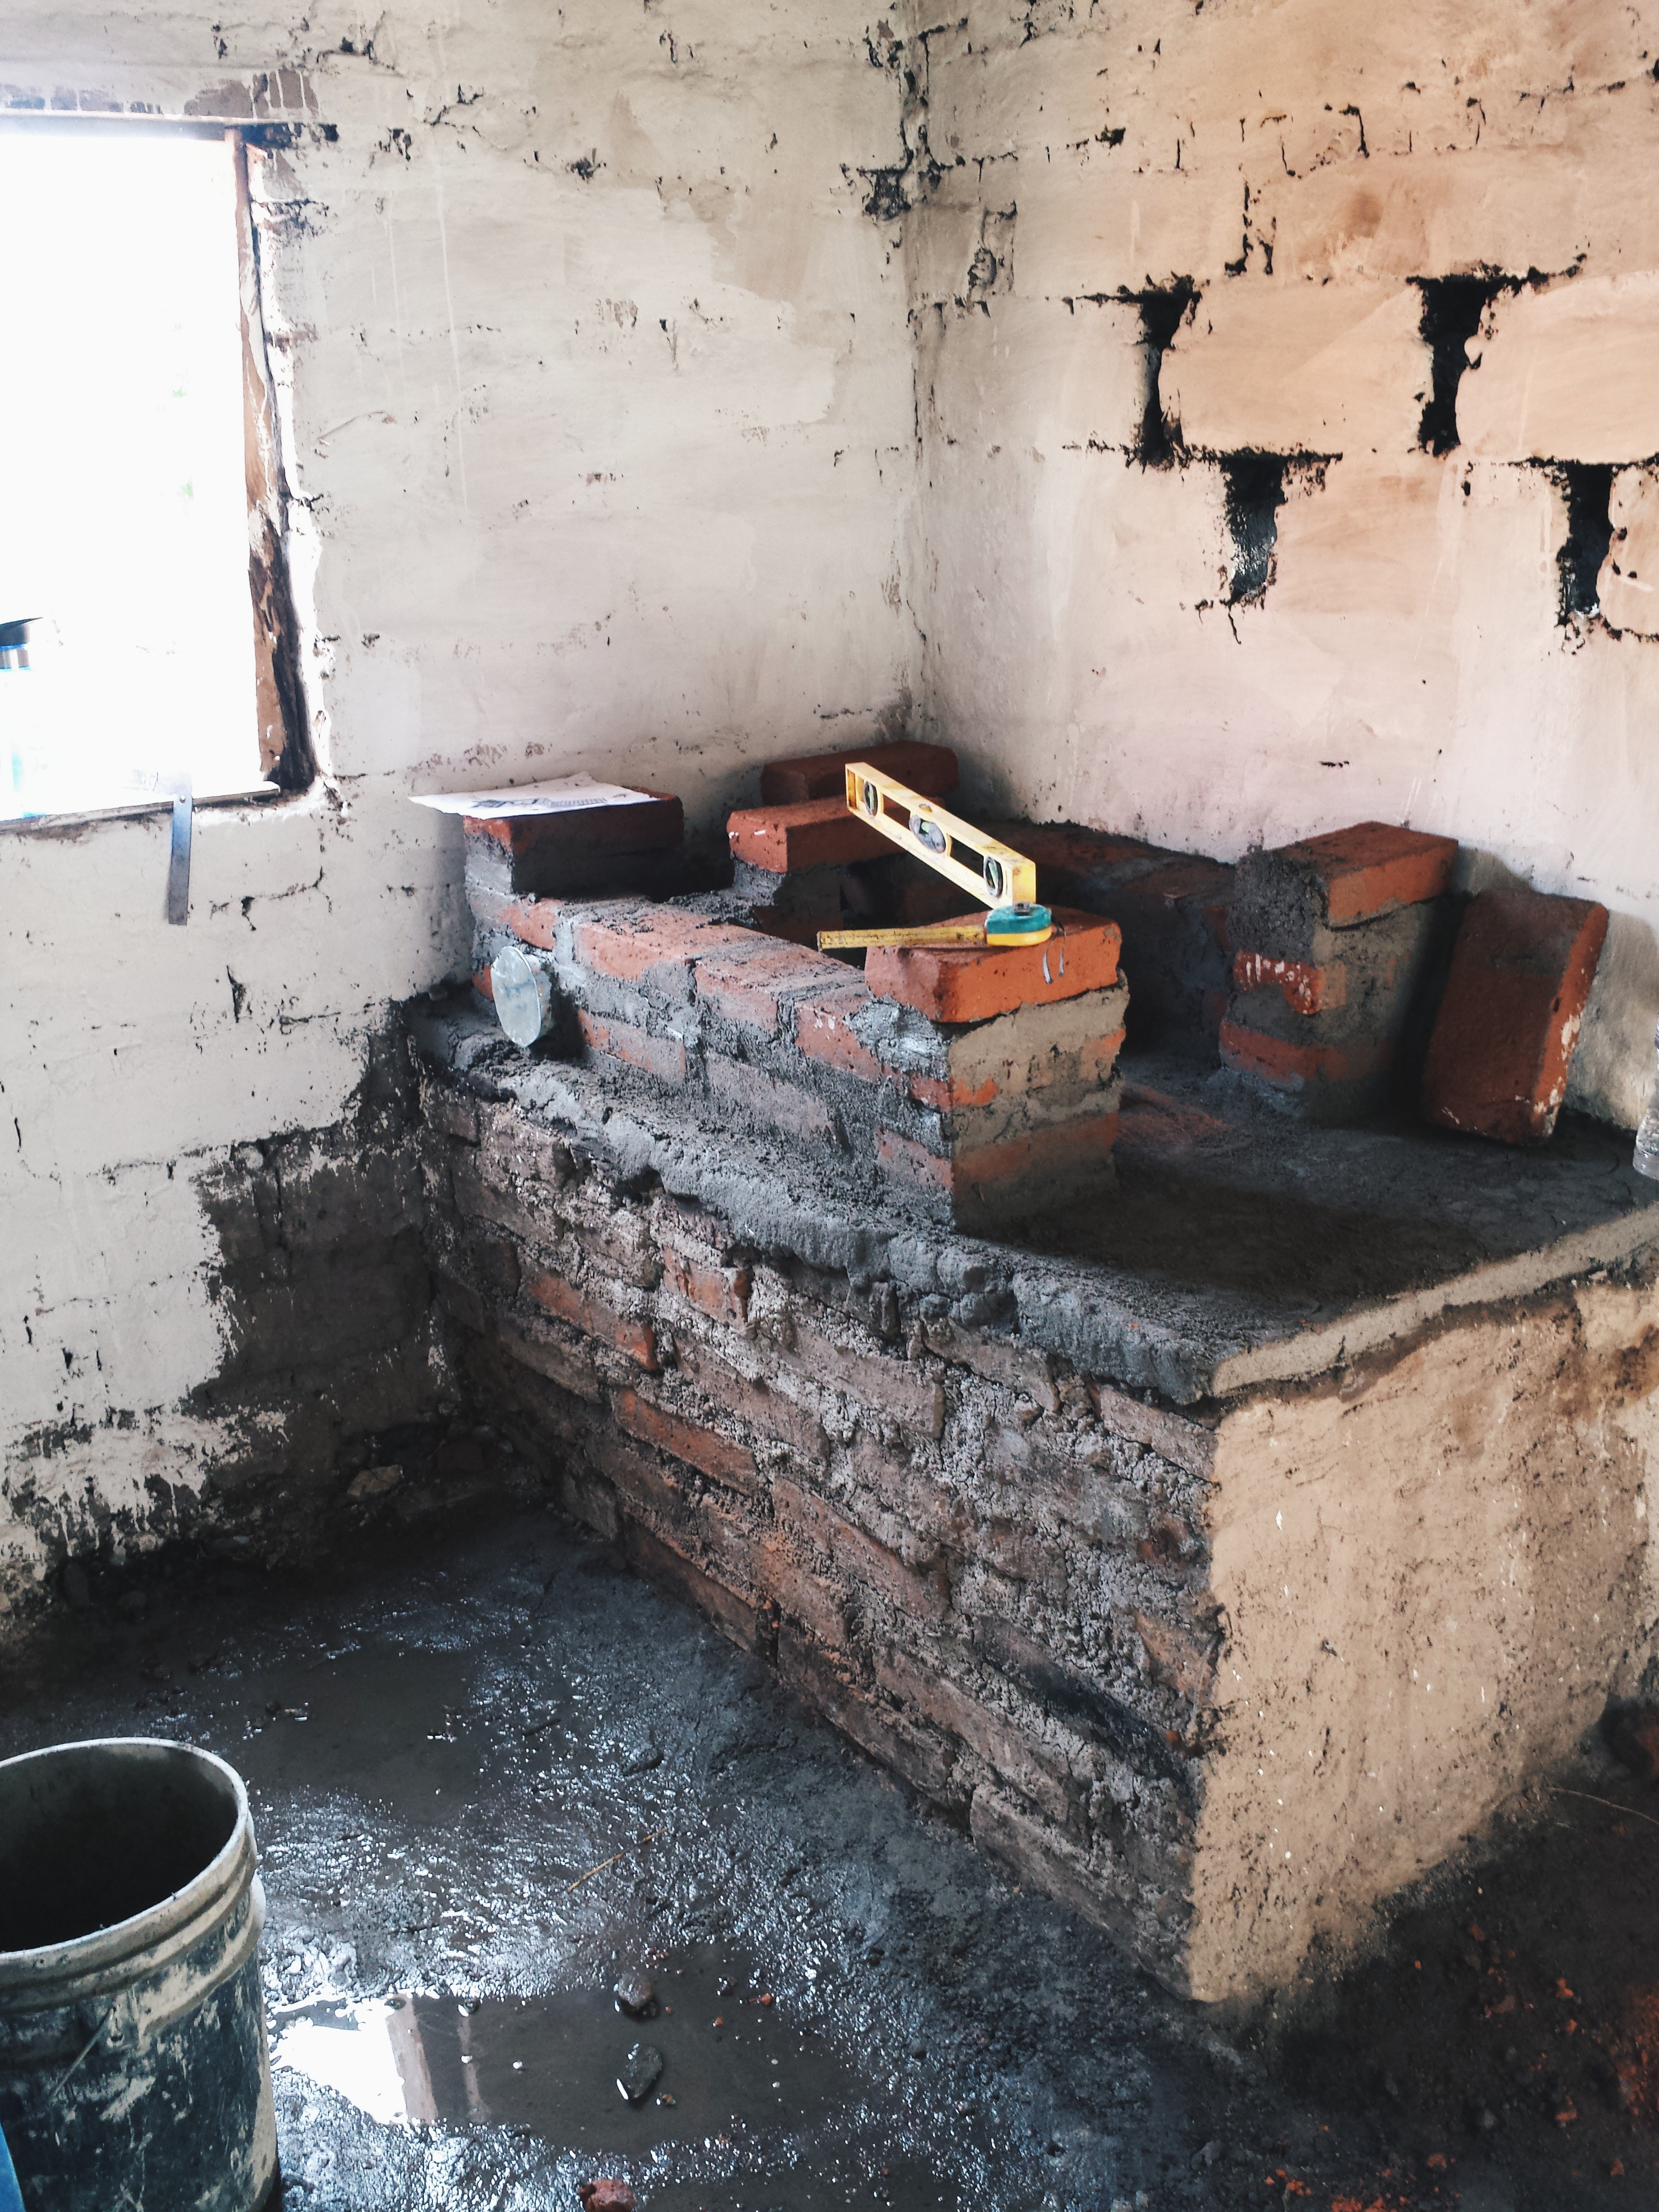 An outside room. In the corner of the room is a rectangular containment made of cement and bricks, which forms the base of the eco-stove.